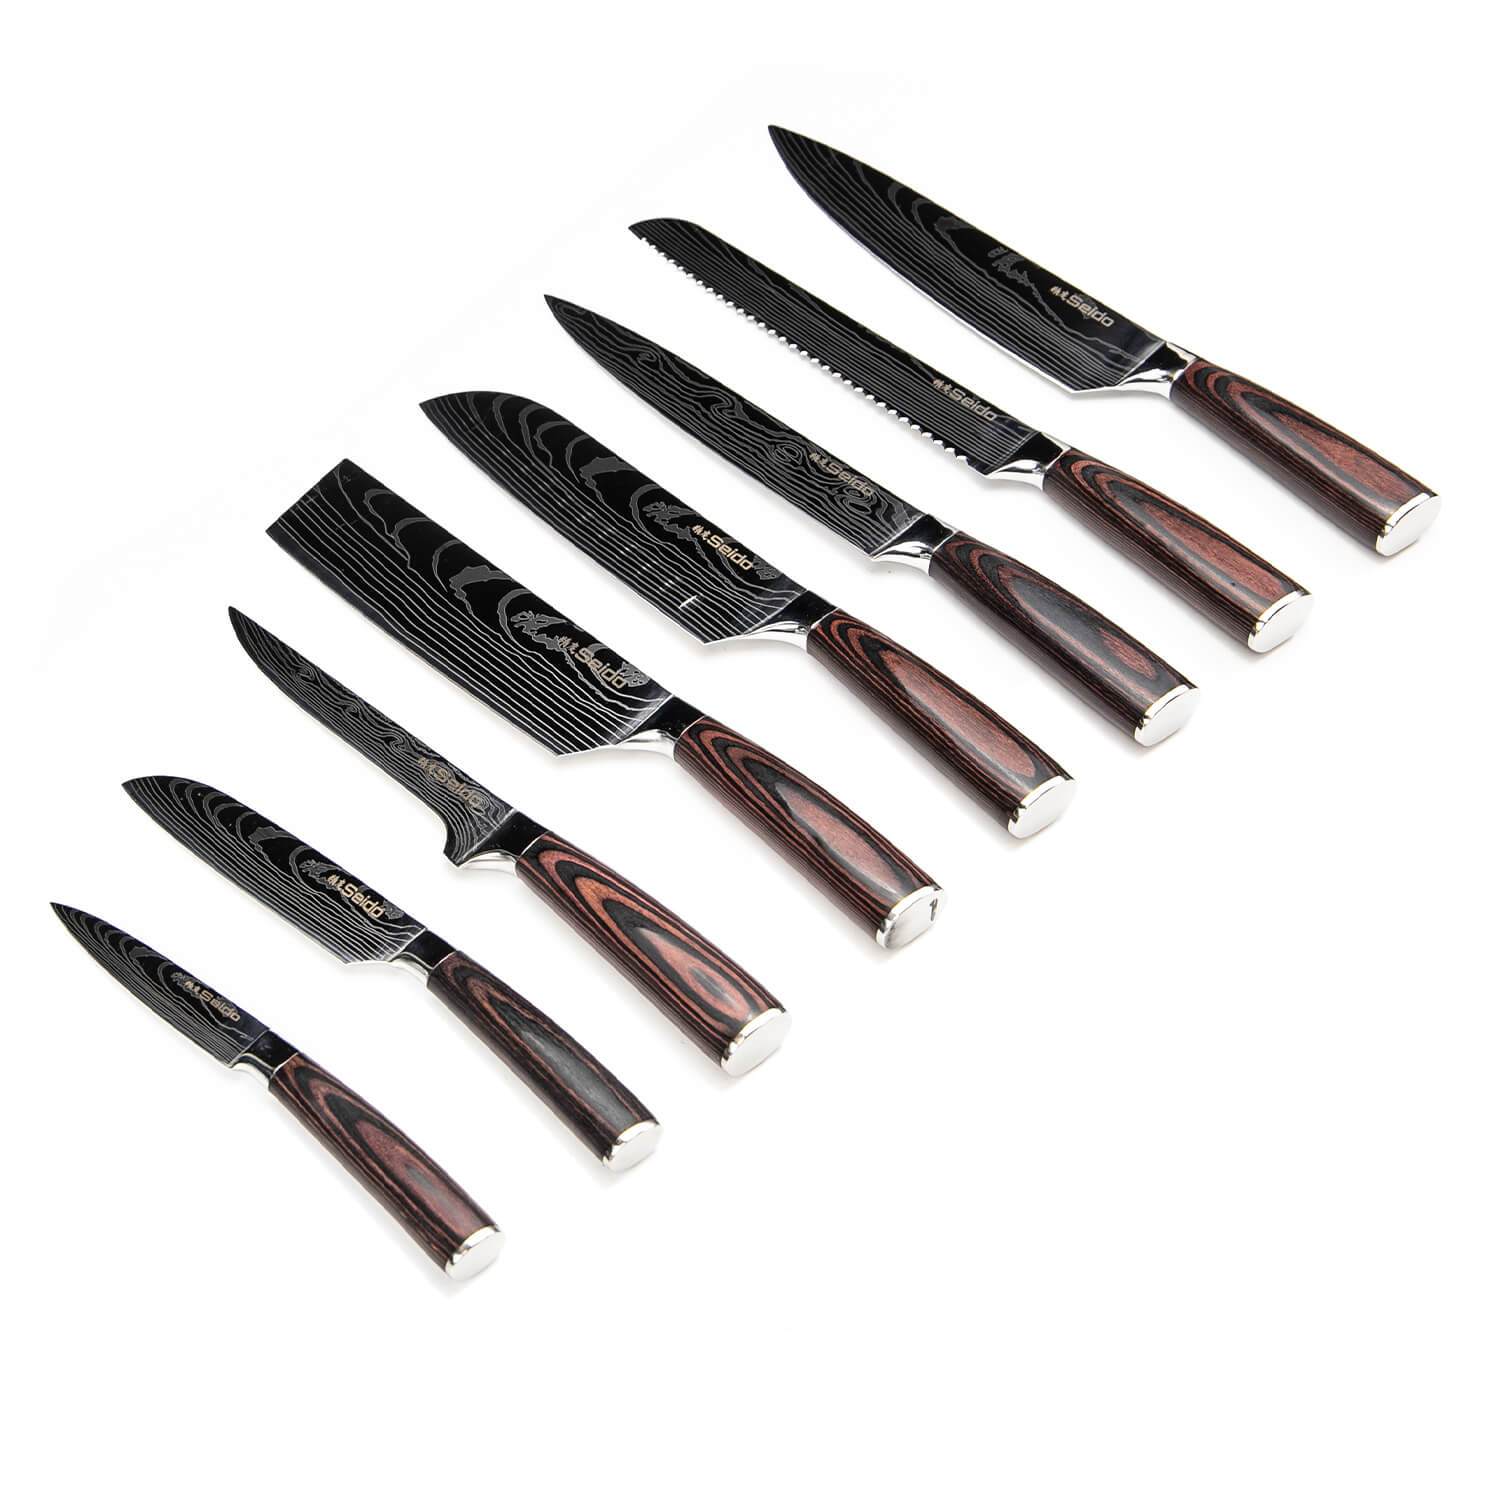 8-pc stainless steel kitchen knife set comes with an 8" Chef knife, 8" Slicing Knife, 8" Bread knife, 7" Santoku Knife, 7" Cleaver Knife, 6" Boning Knife, 5" Santoku Knife and a 3.5" paring knife.